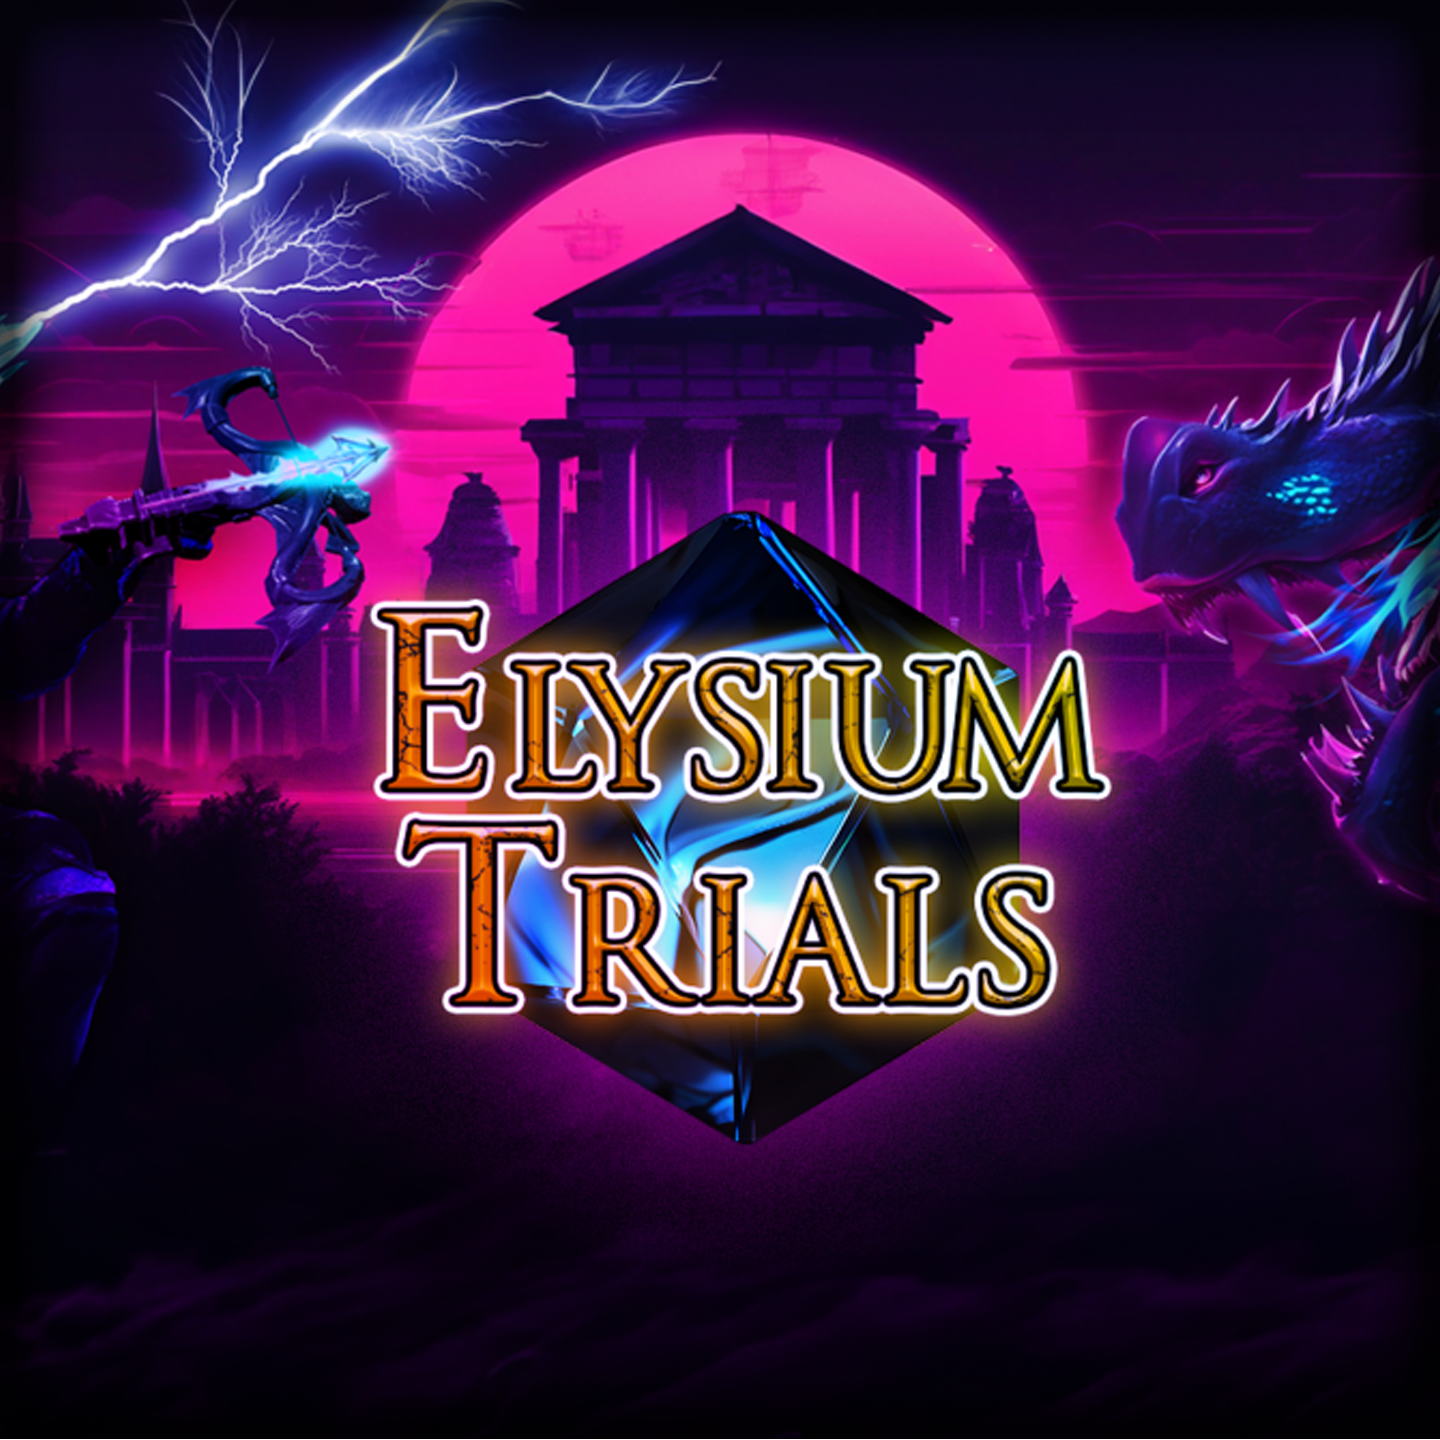 Elysium Trials on SideQuest Oculus Quest Games & Apps including